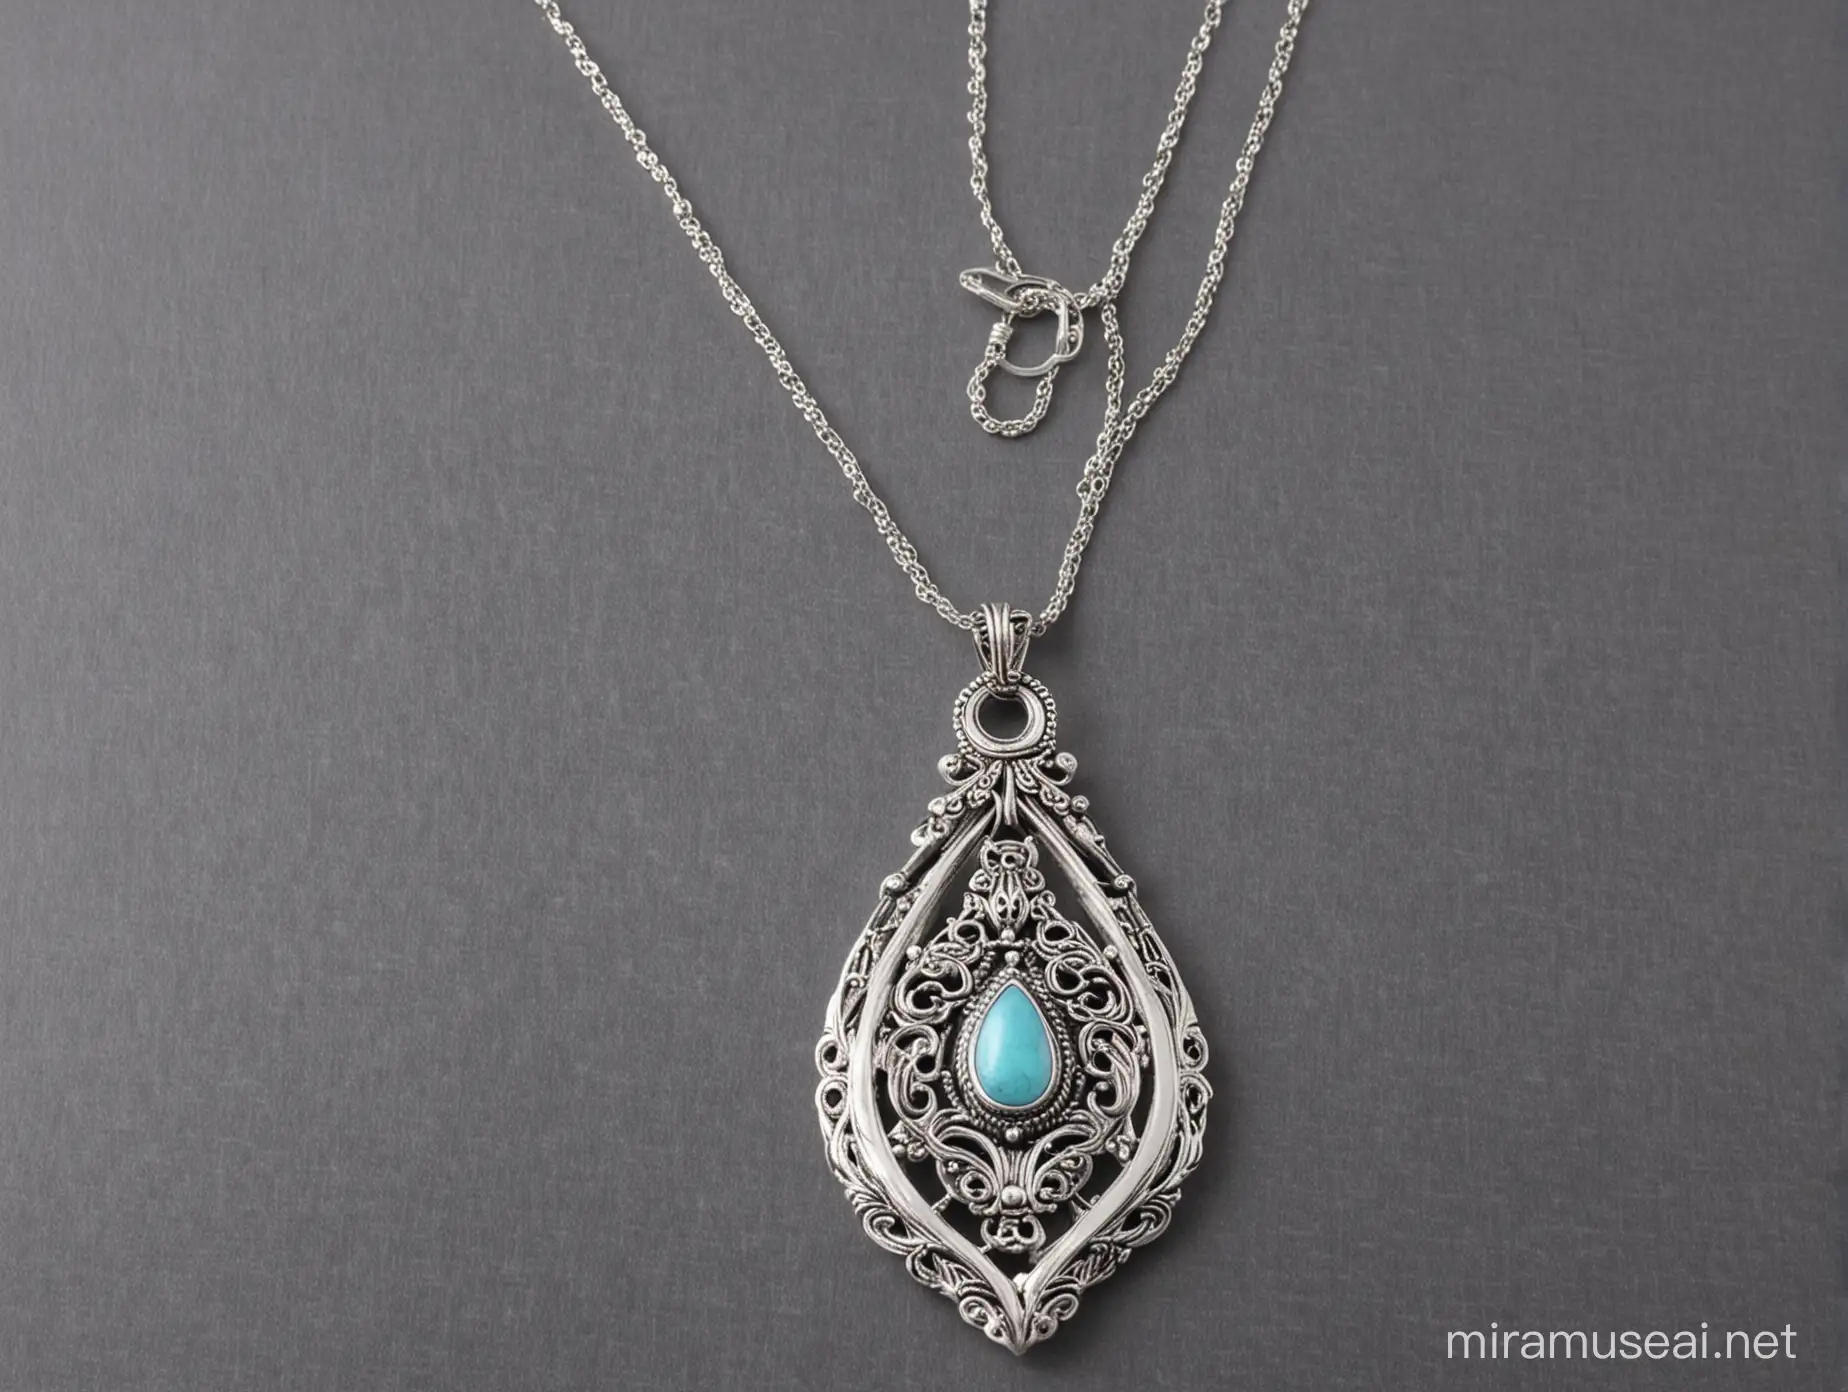 The History and Symbolism Behind Long Silver Pendant Necklaces
